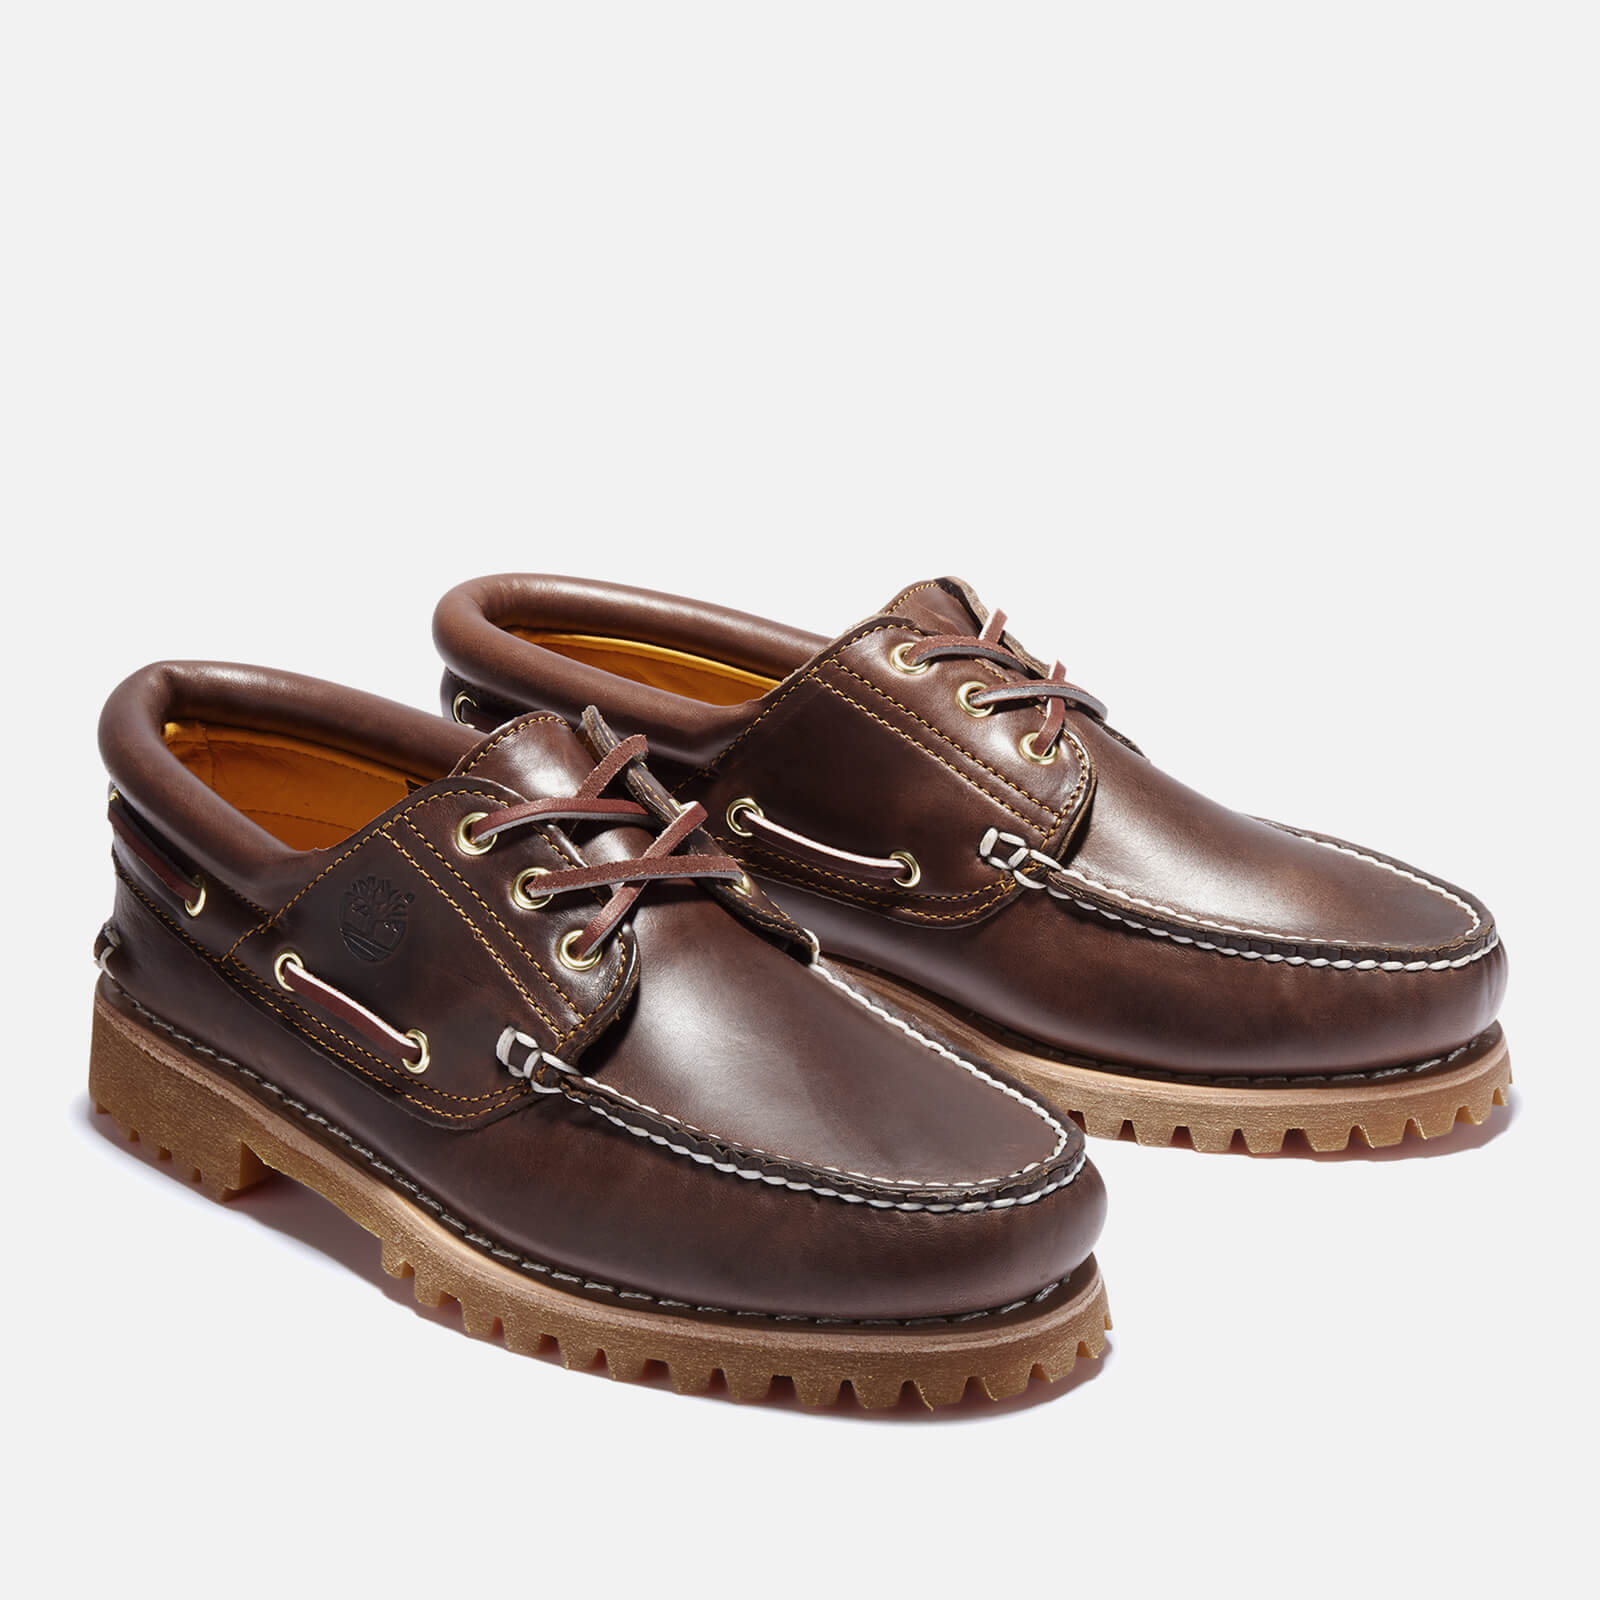 Timberland Men’s Authentic Leather Boat Shoes